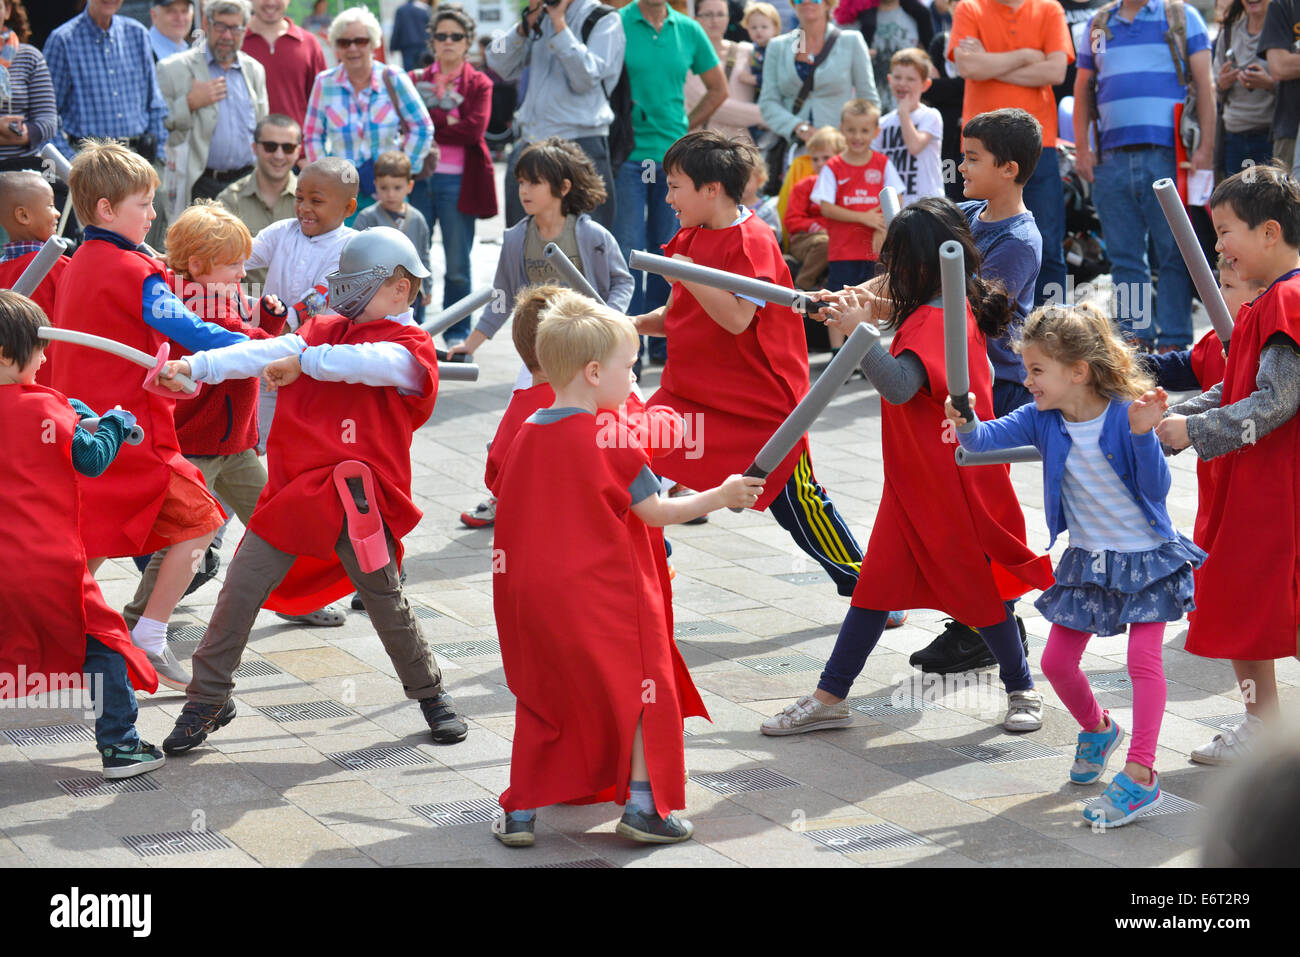 Granary Square, Kings Cross, London, UK. 30th August 2014. Romans versus Britons at the Romans vs Boudicca event in Granary Square. Credit:  Matthew Chattle/Alamy Live News Stock Photo